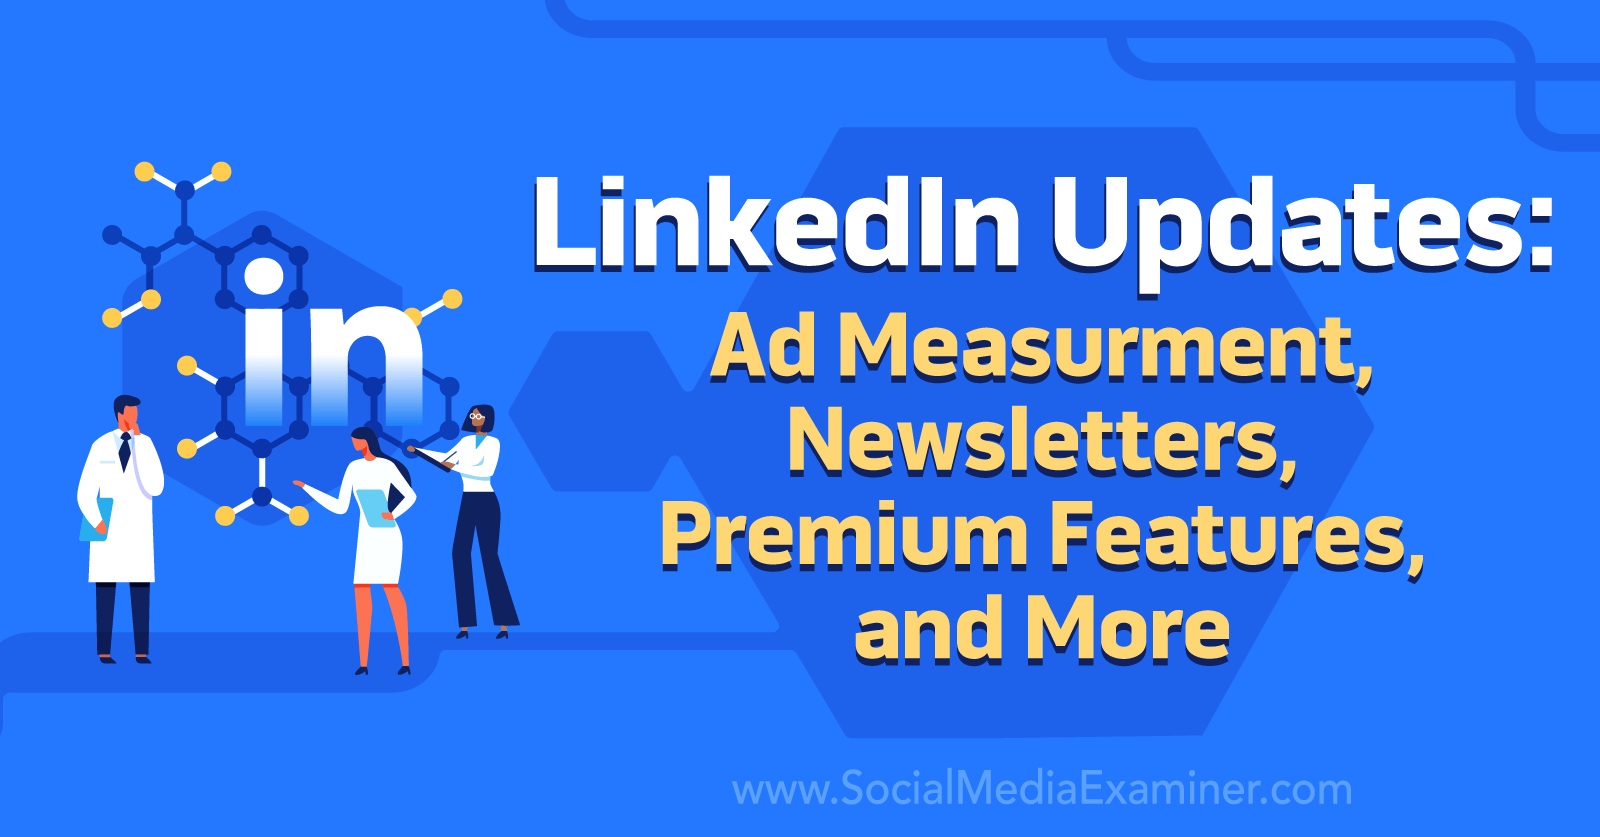 LinkedIn Updates: Ad Measurement, Newsletters, Premium Features, and More by Social Media Examiner